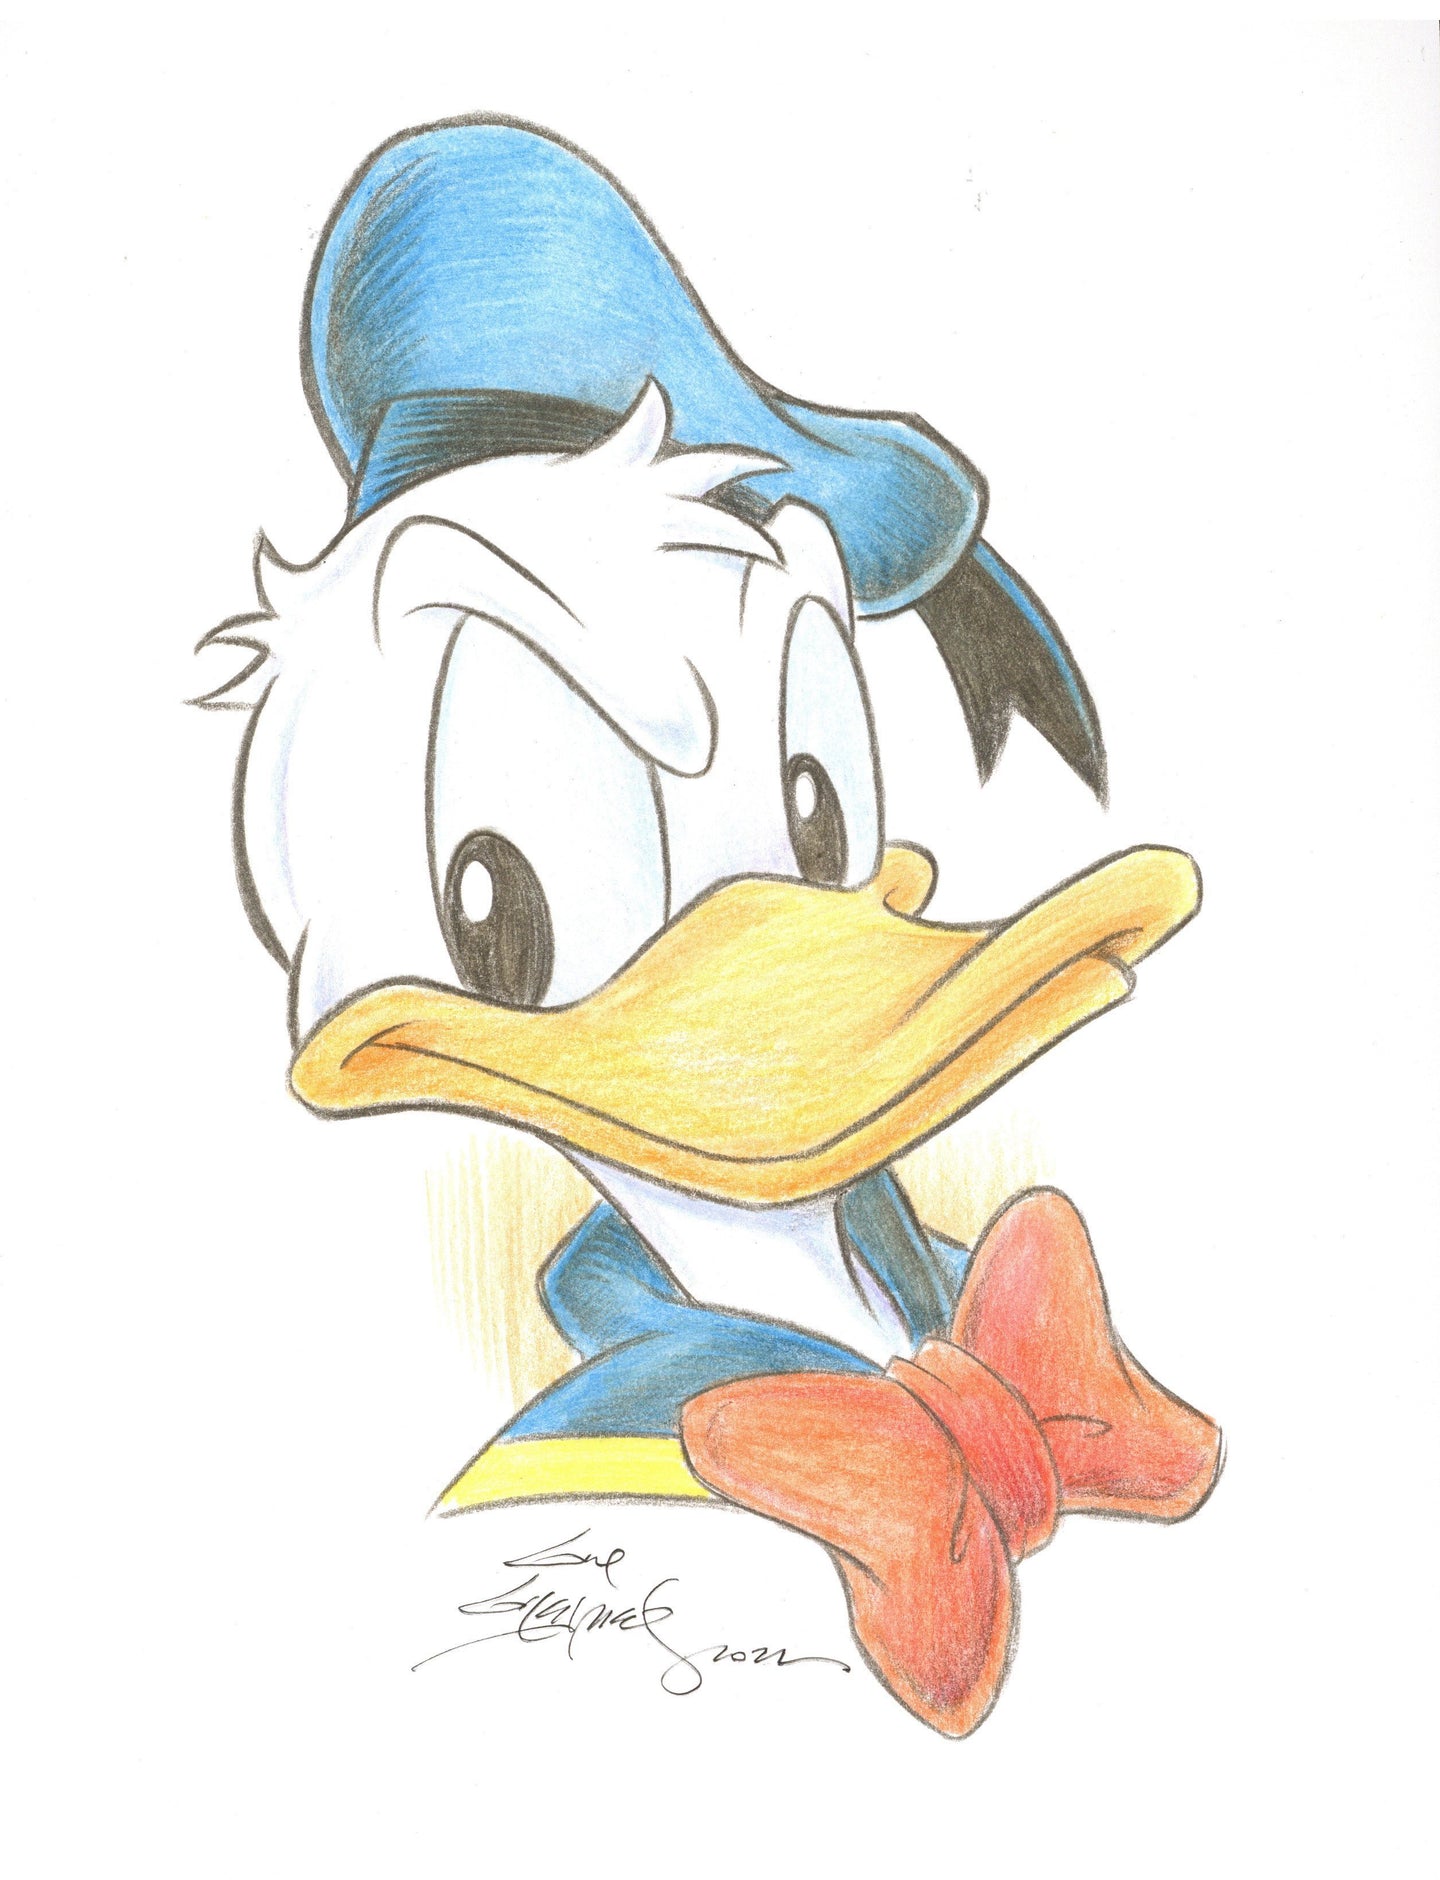 Donald the Duck Original Art 8.5x11 Sketch - Created by Guy Gilchrist